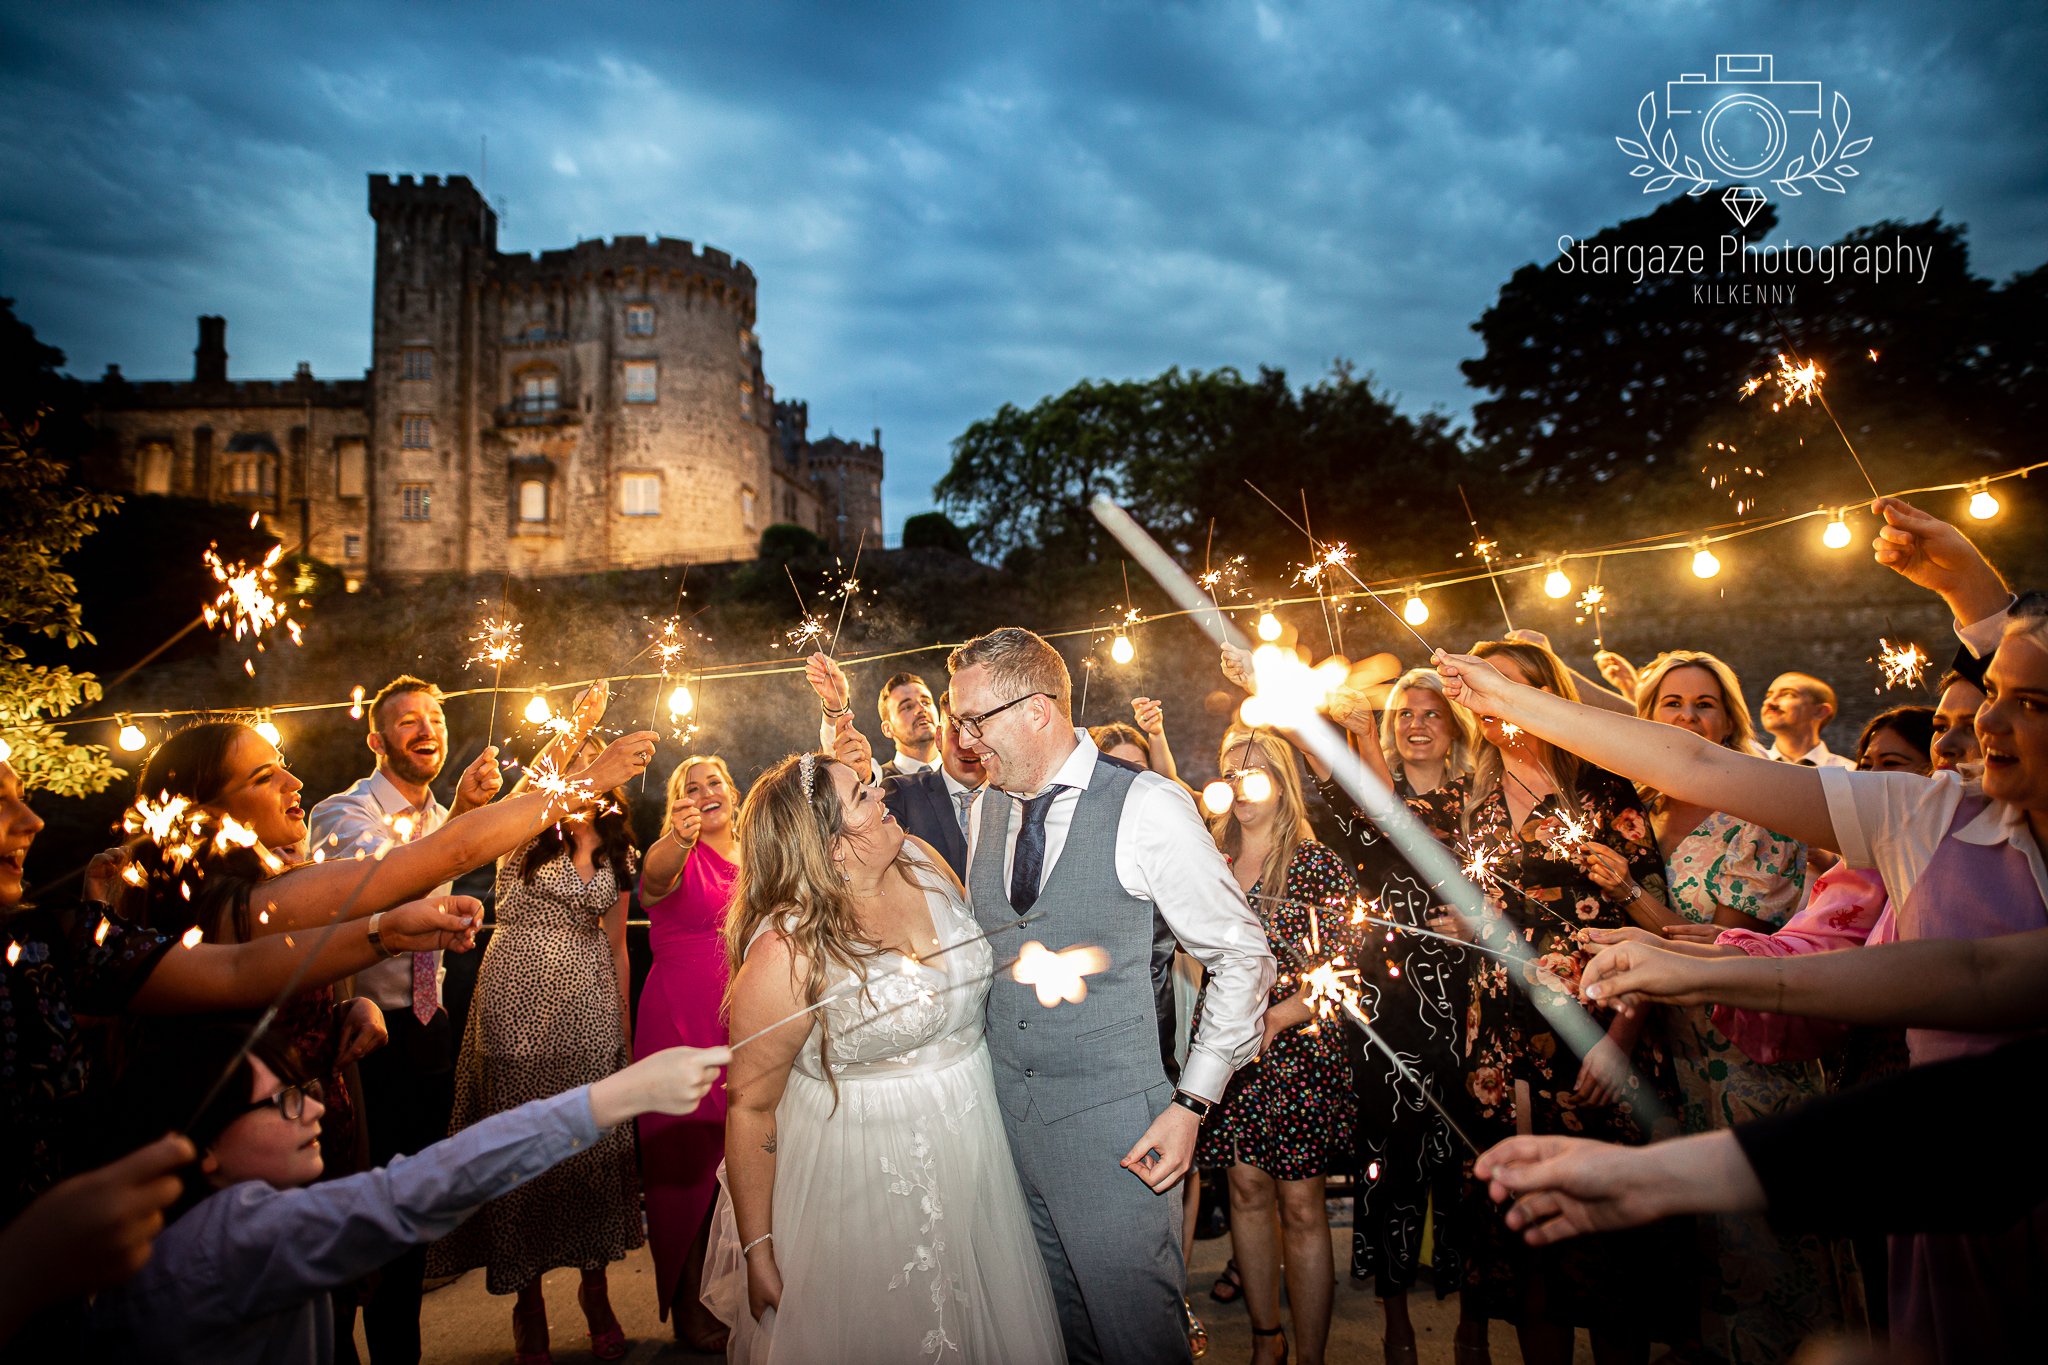 Night time wedding sparkler photography at The River Court Hotel.